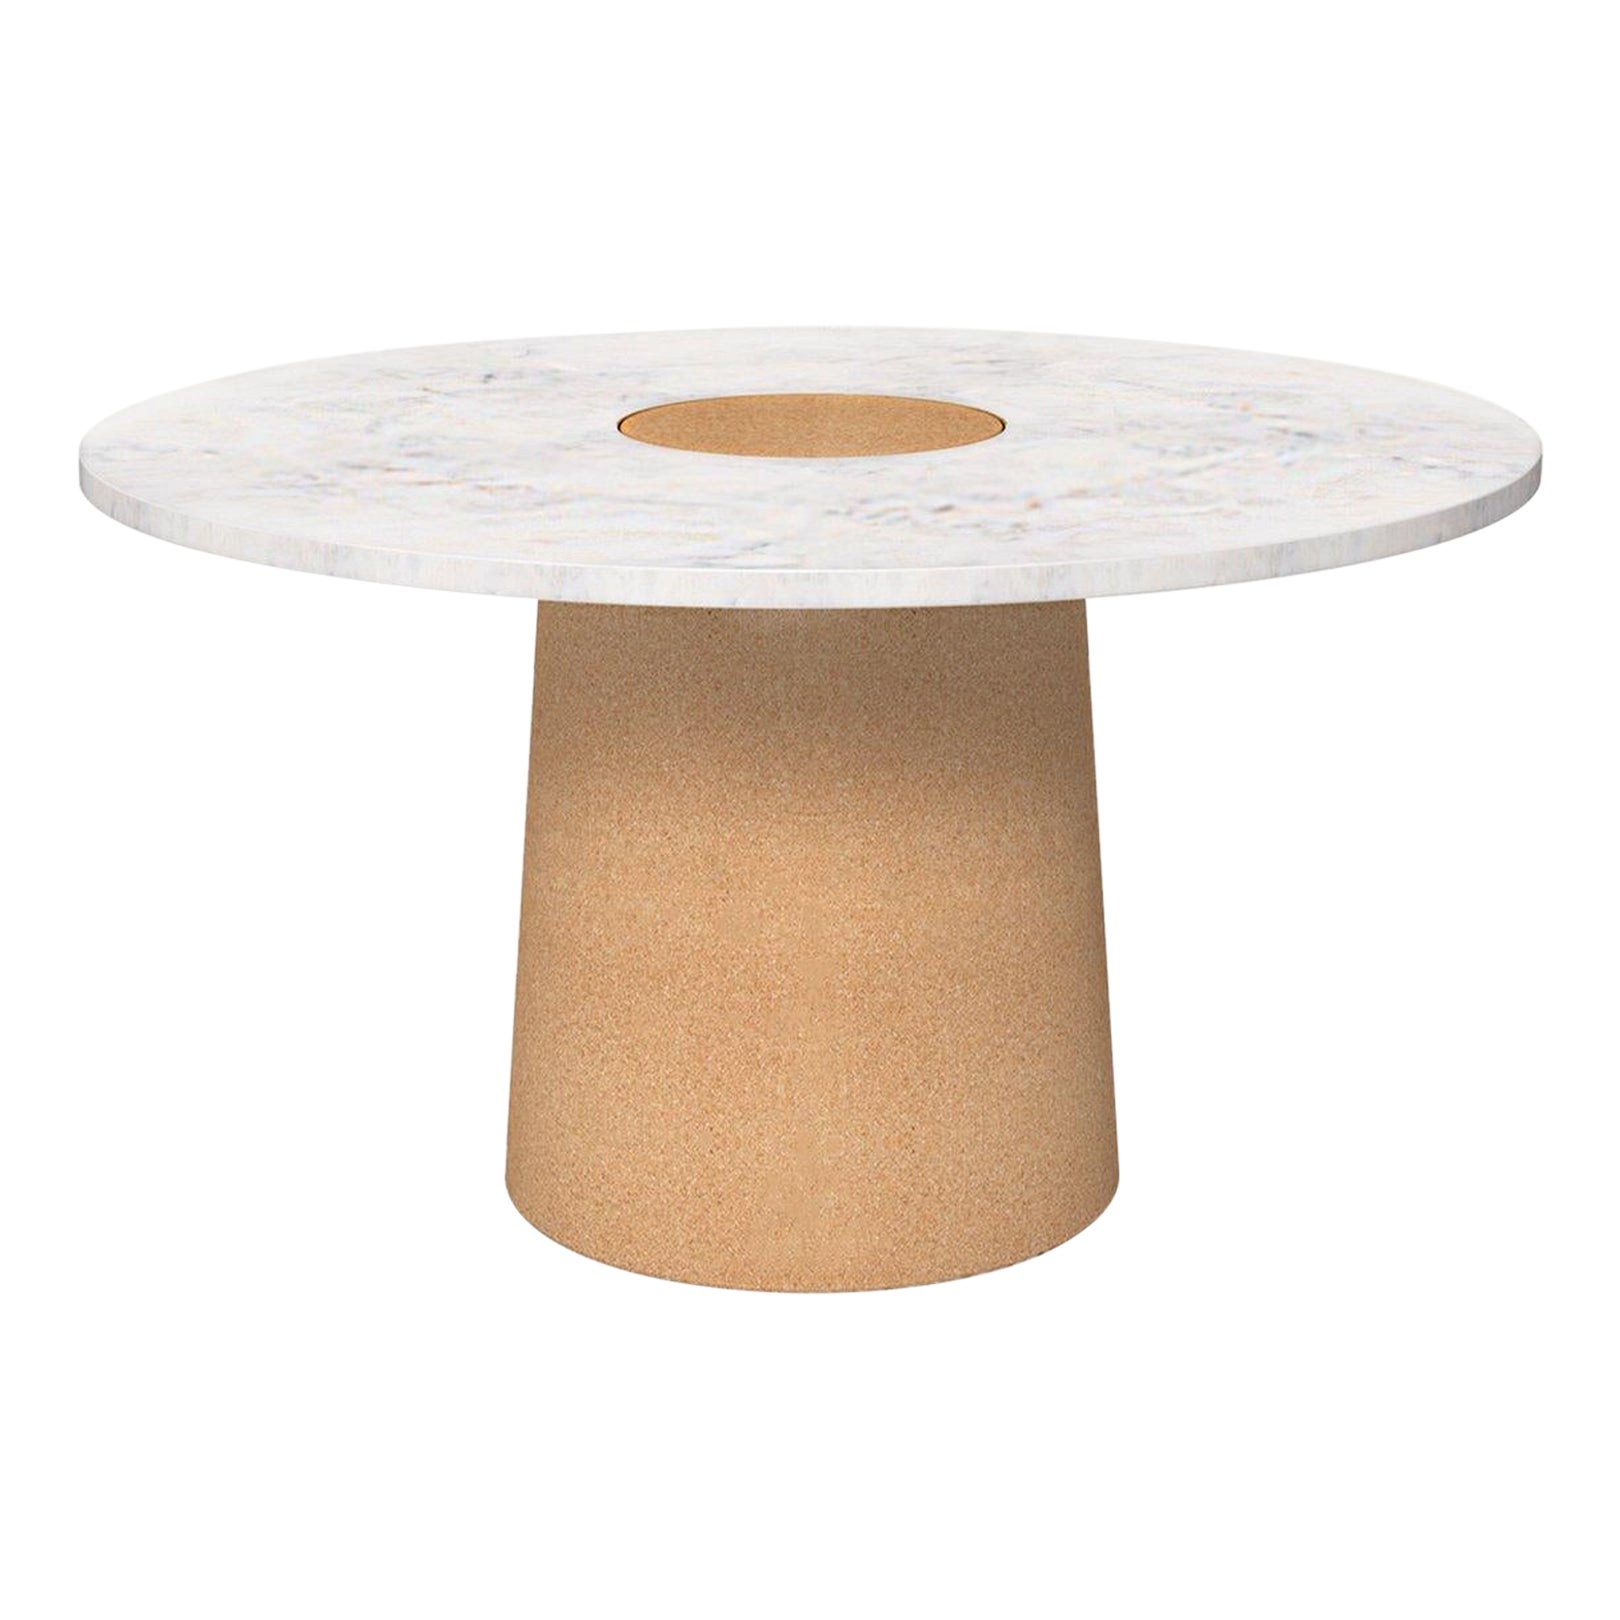 FRAMA Sintra Dining Table in Cork Base & White Marble by Nicholai Wiig Hansen For Sale